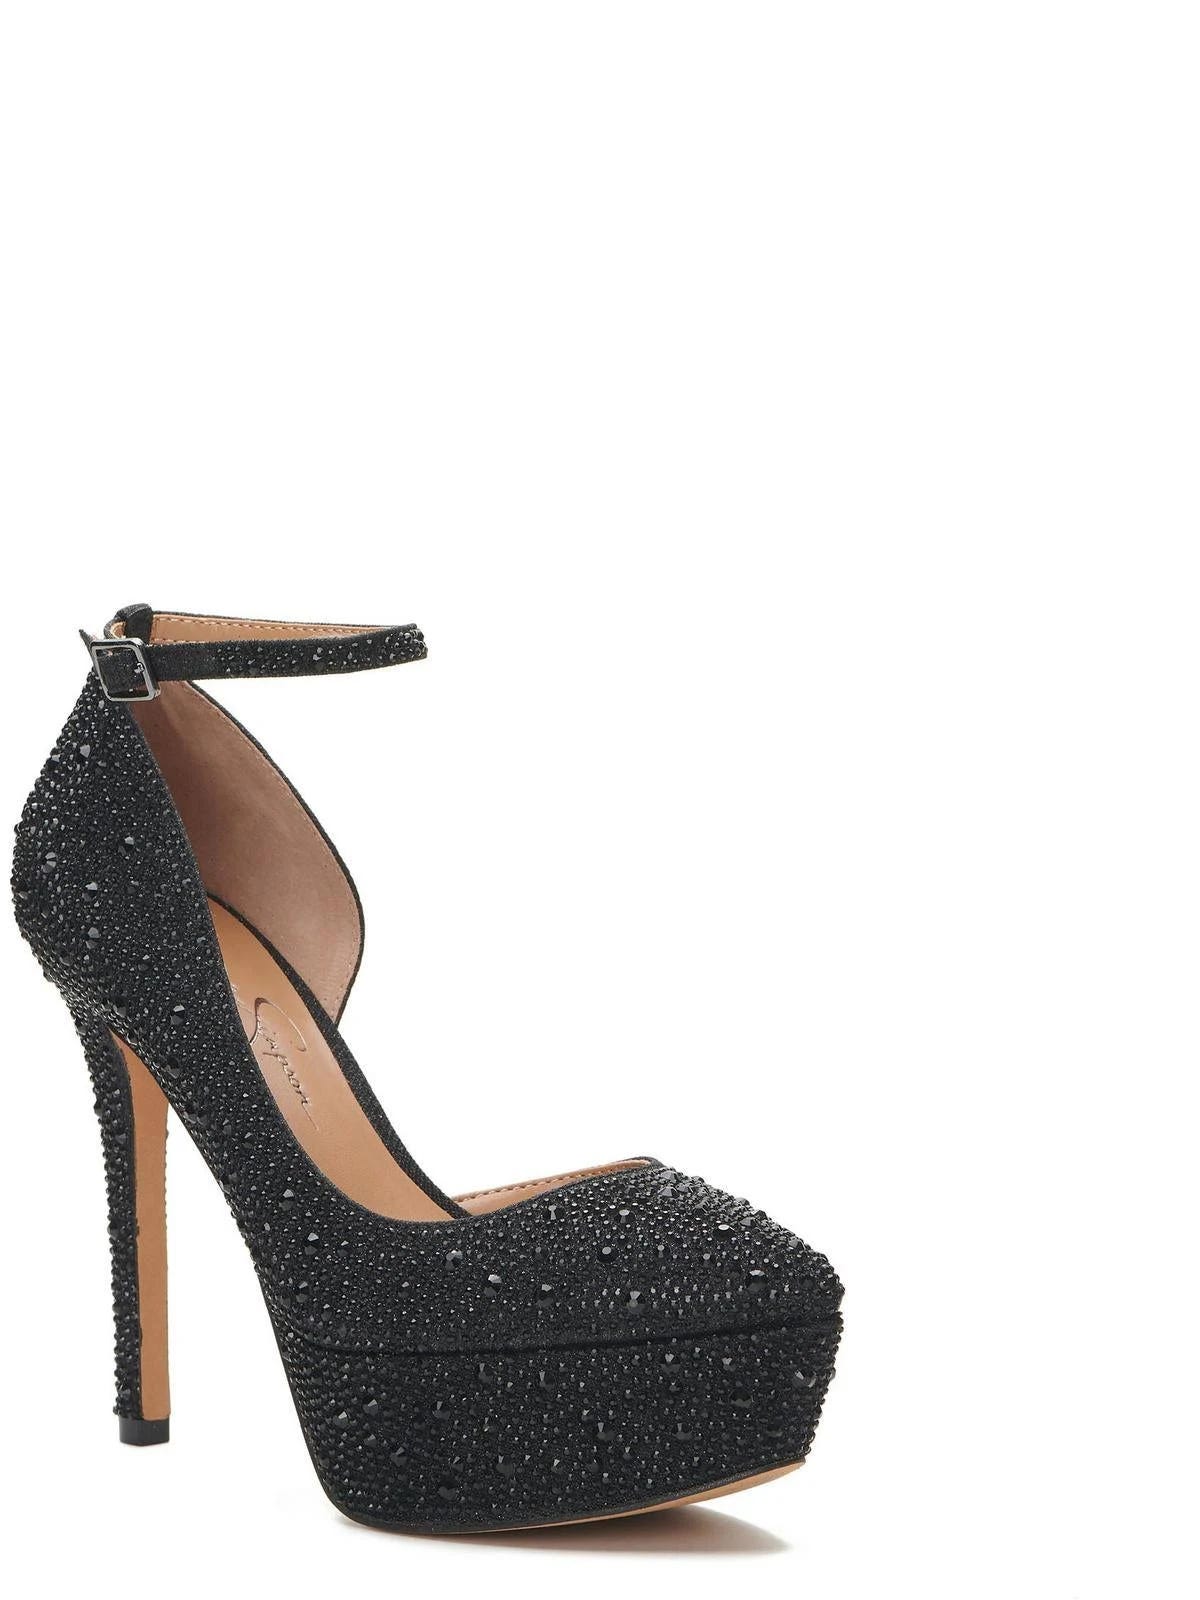 Stylish Sparkling Pointed Toe Platform Pumps by Jessica Simpson | Image